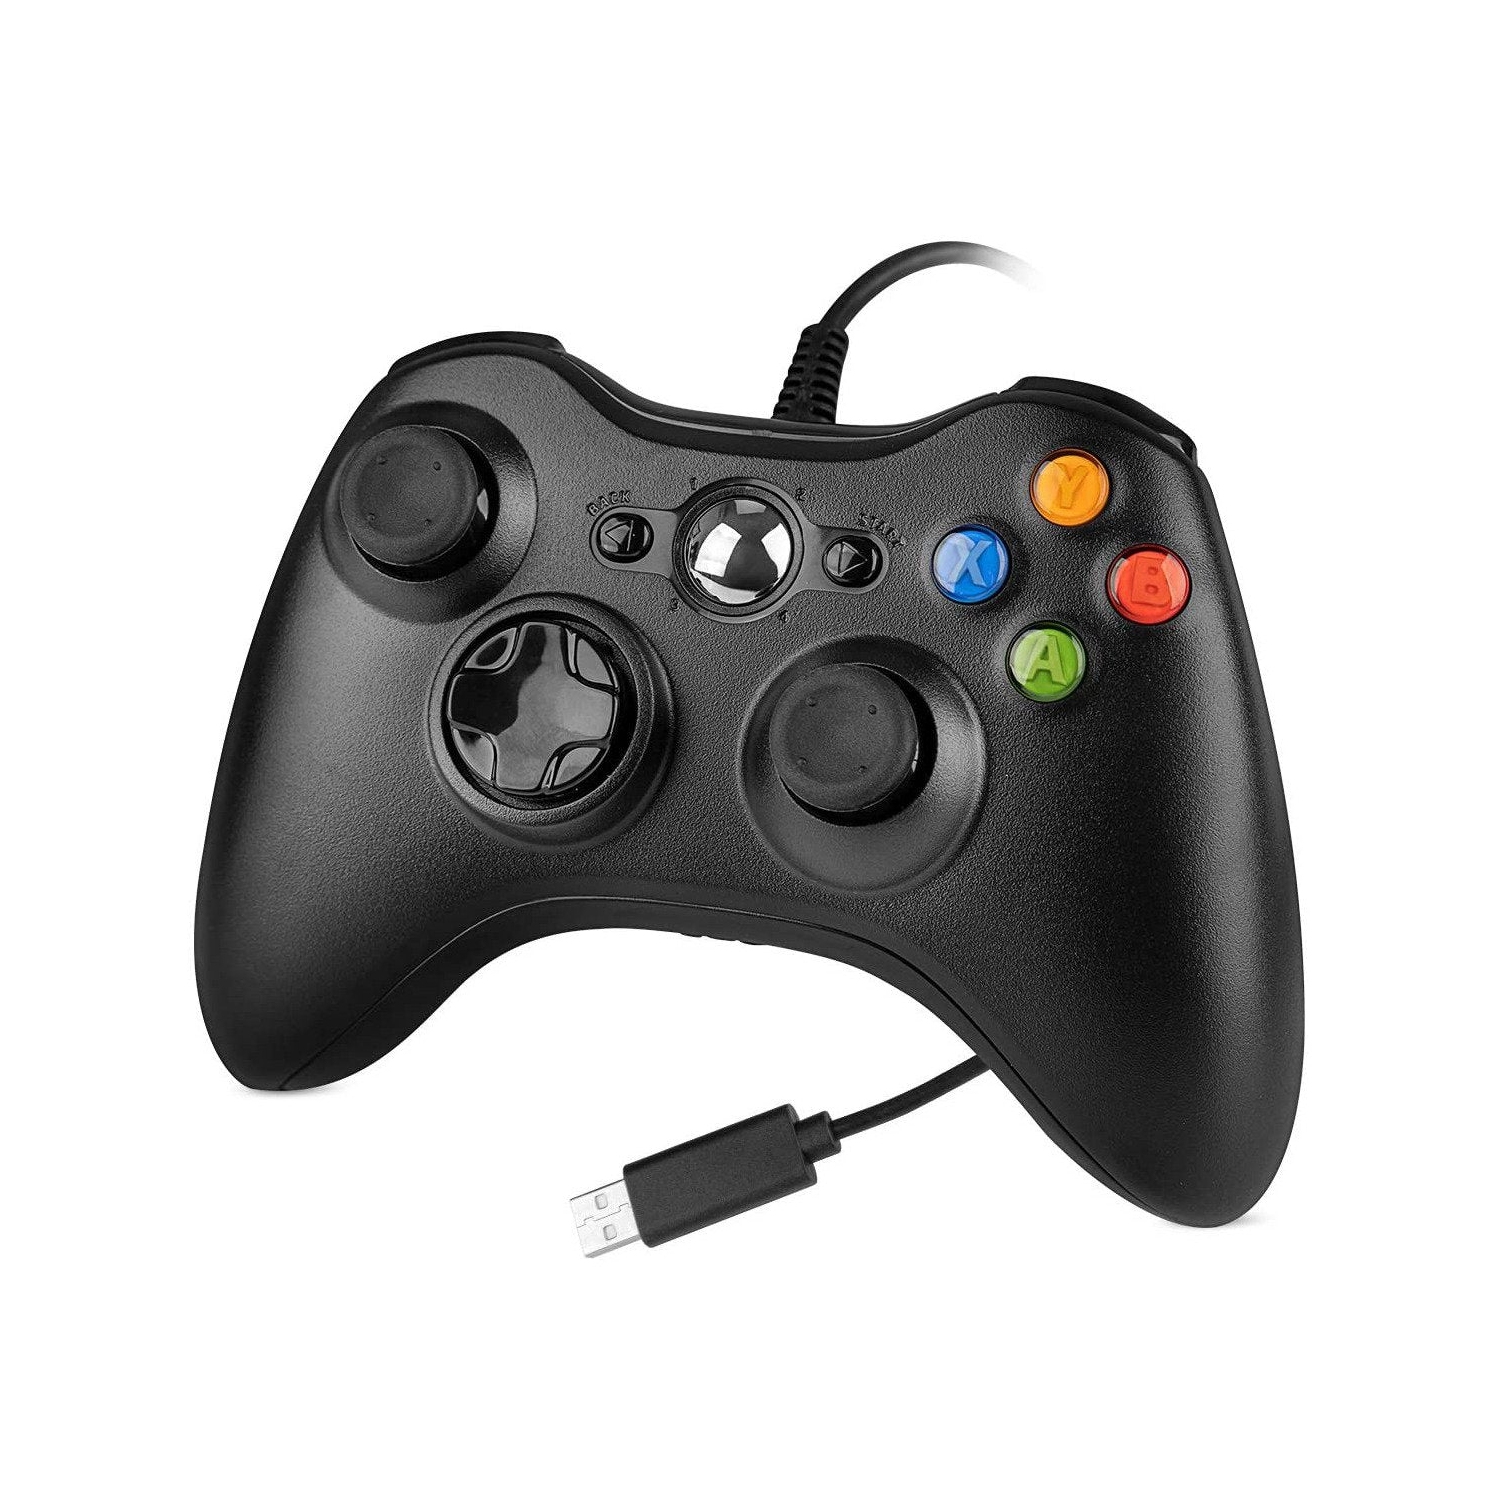 Wired USB Joystick with Dual Vibration and Shoulders Buttons for Xbox 360/Xbox 360 Slim/PC Windows 7/8/10 (Black)